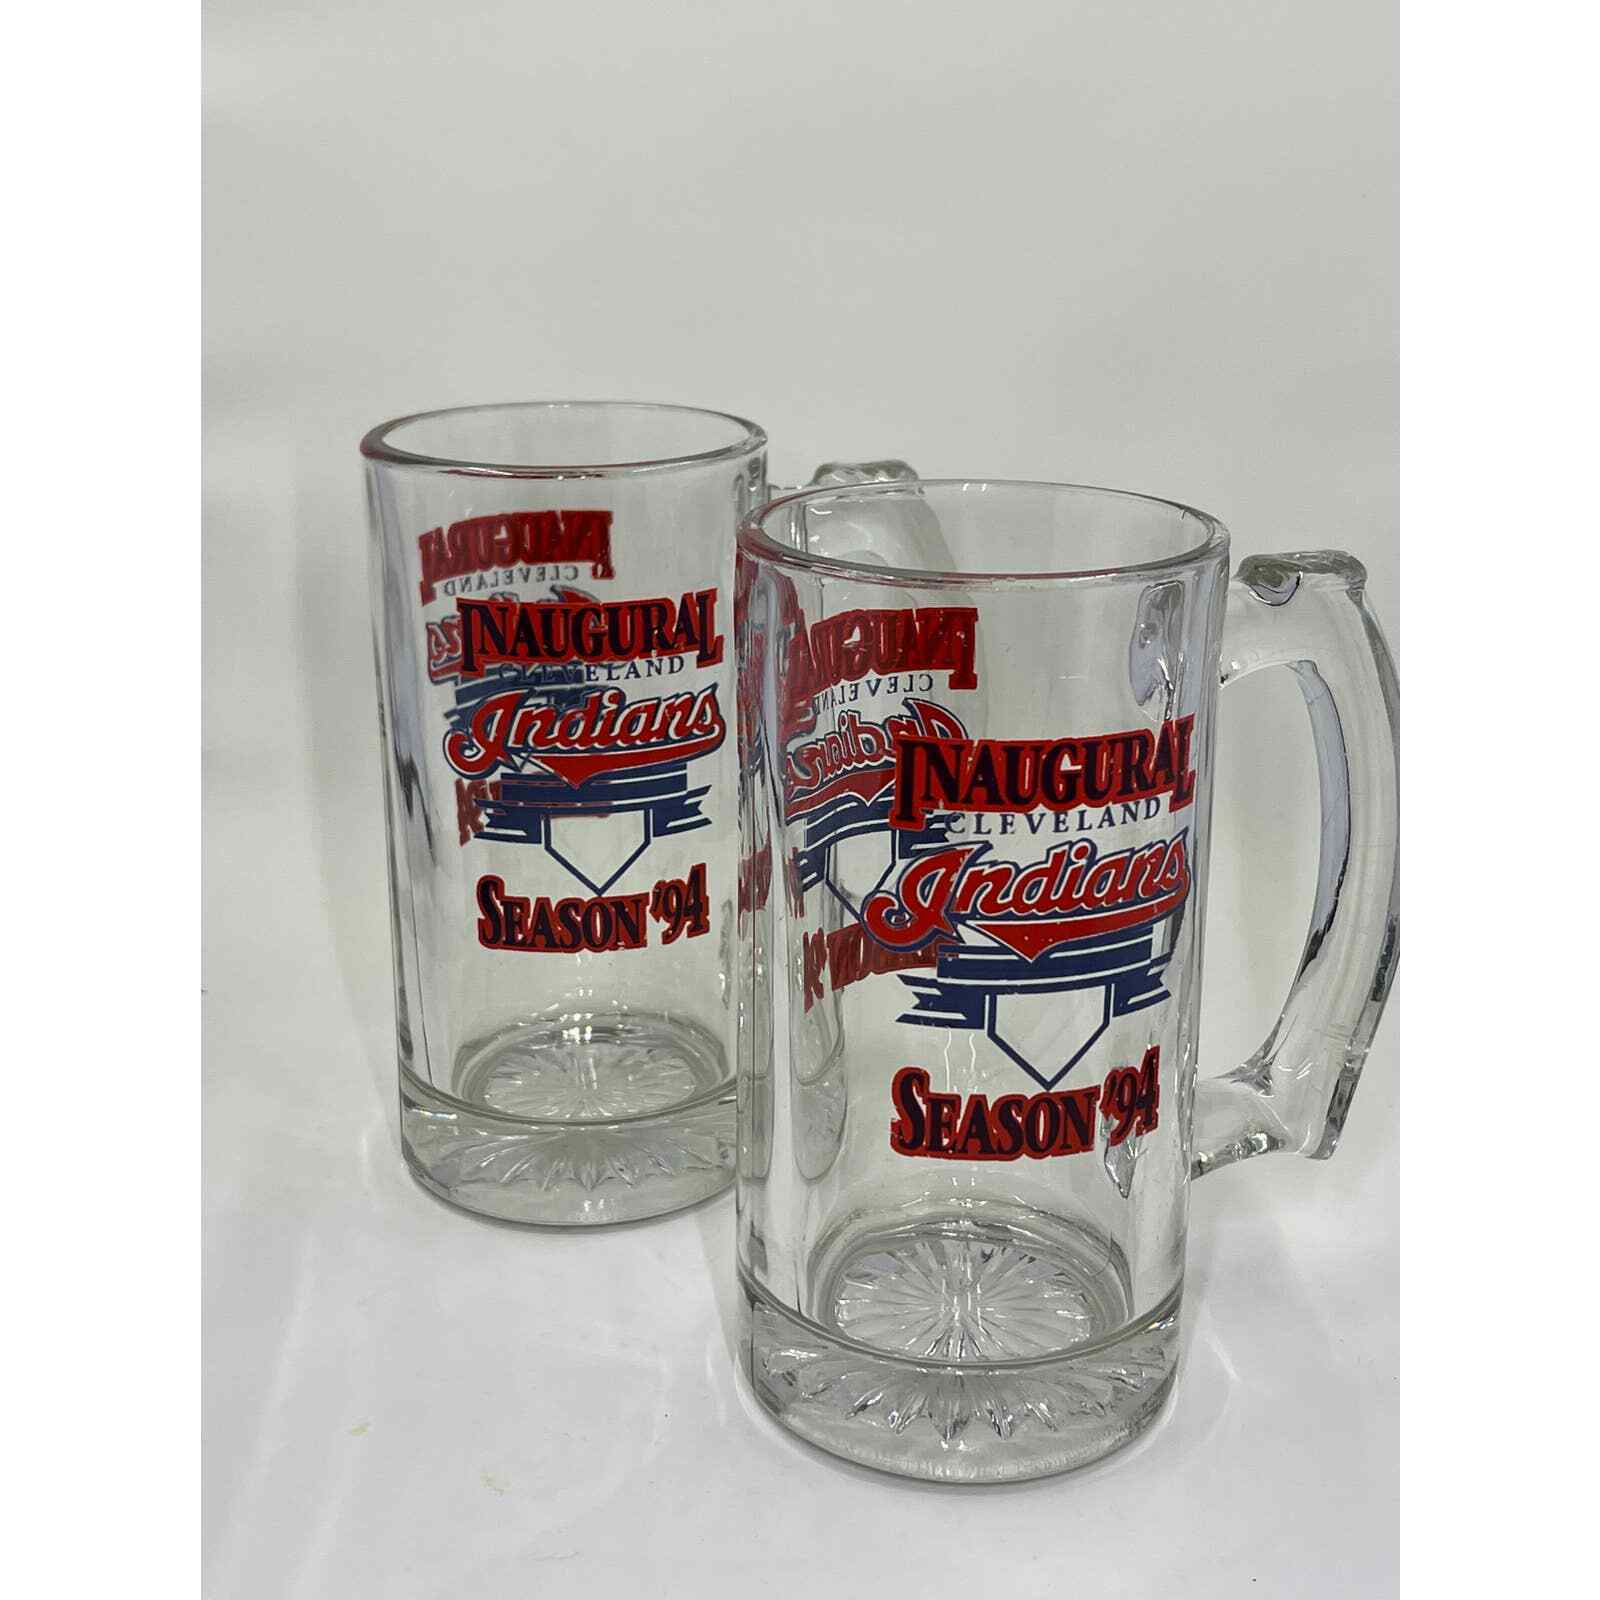 Pair of 1994 Cleveland Indians Inaugurial 1994 game mugs